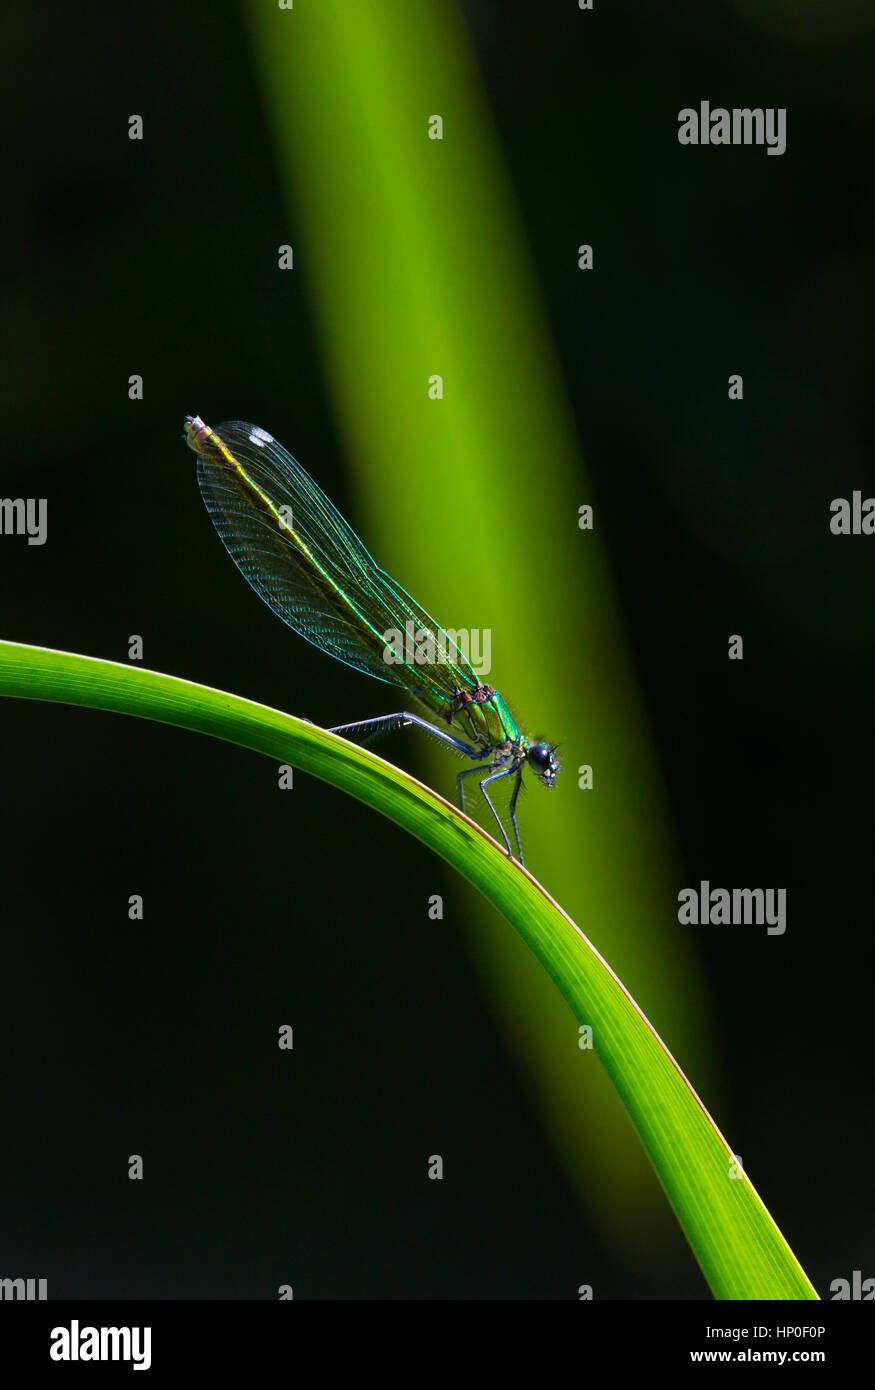 Banded Demoiselle (Calopteryx splendens) - Portrait shot of a female banded demoiselle on a bright green reed, against a black & green background Stock Photo